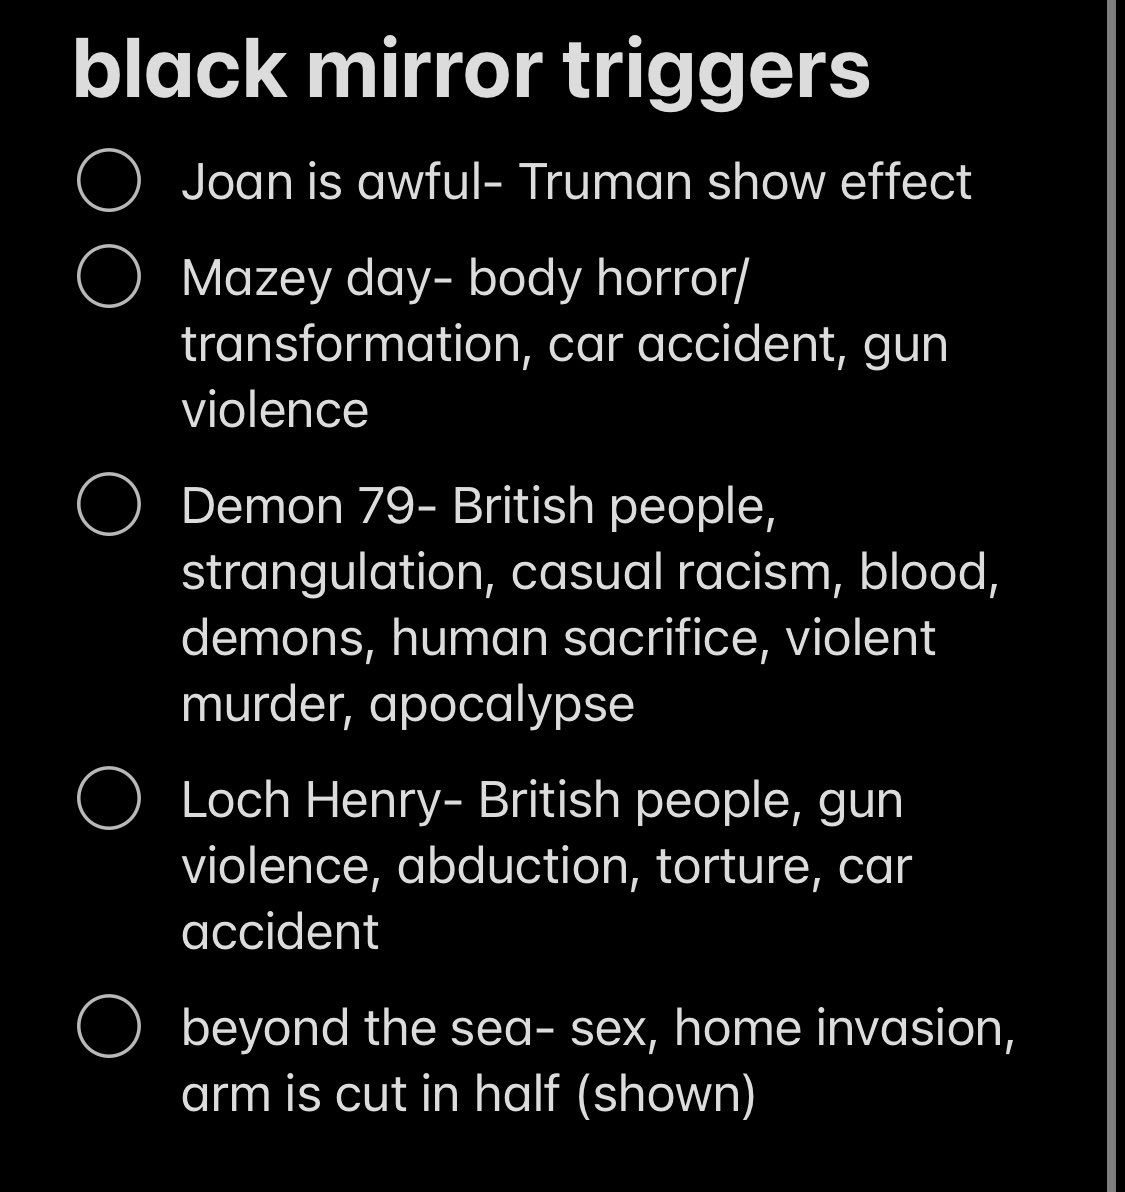 here’s the black mirror season six trigger list if anyone is planning to watch but wants to know what they’re getting into. if you’re gonna skip any skip demon 79 but also it was my favorite.